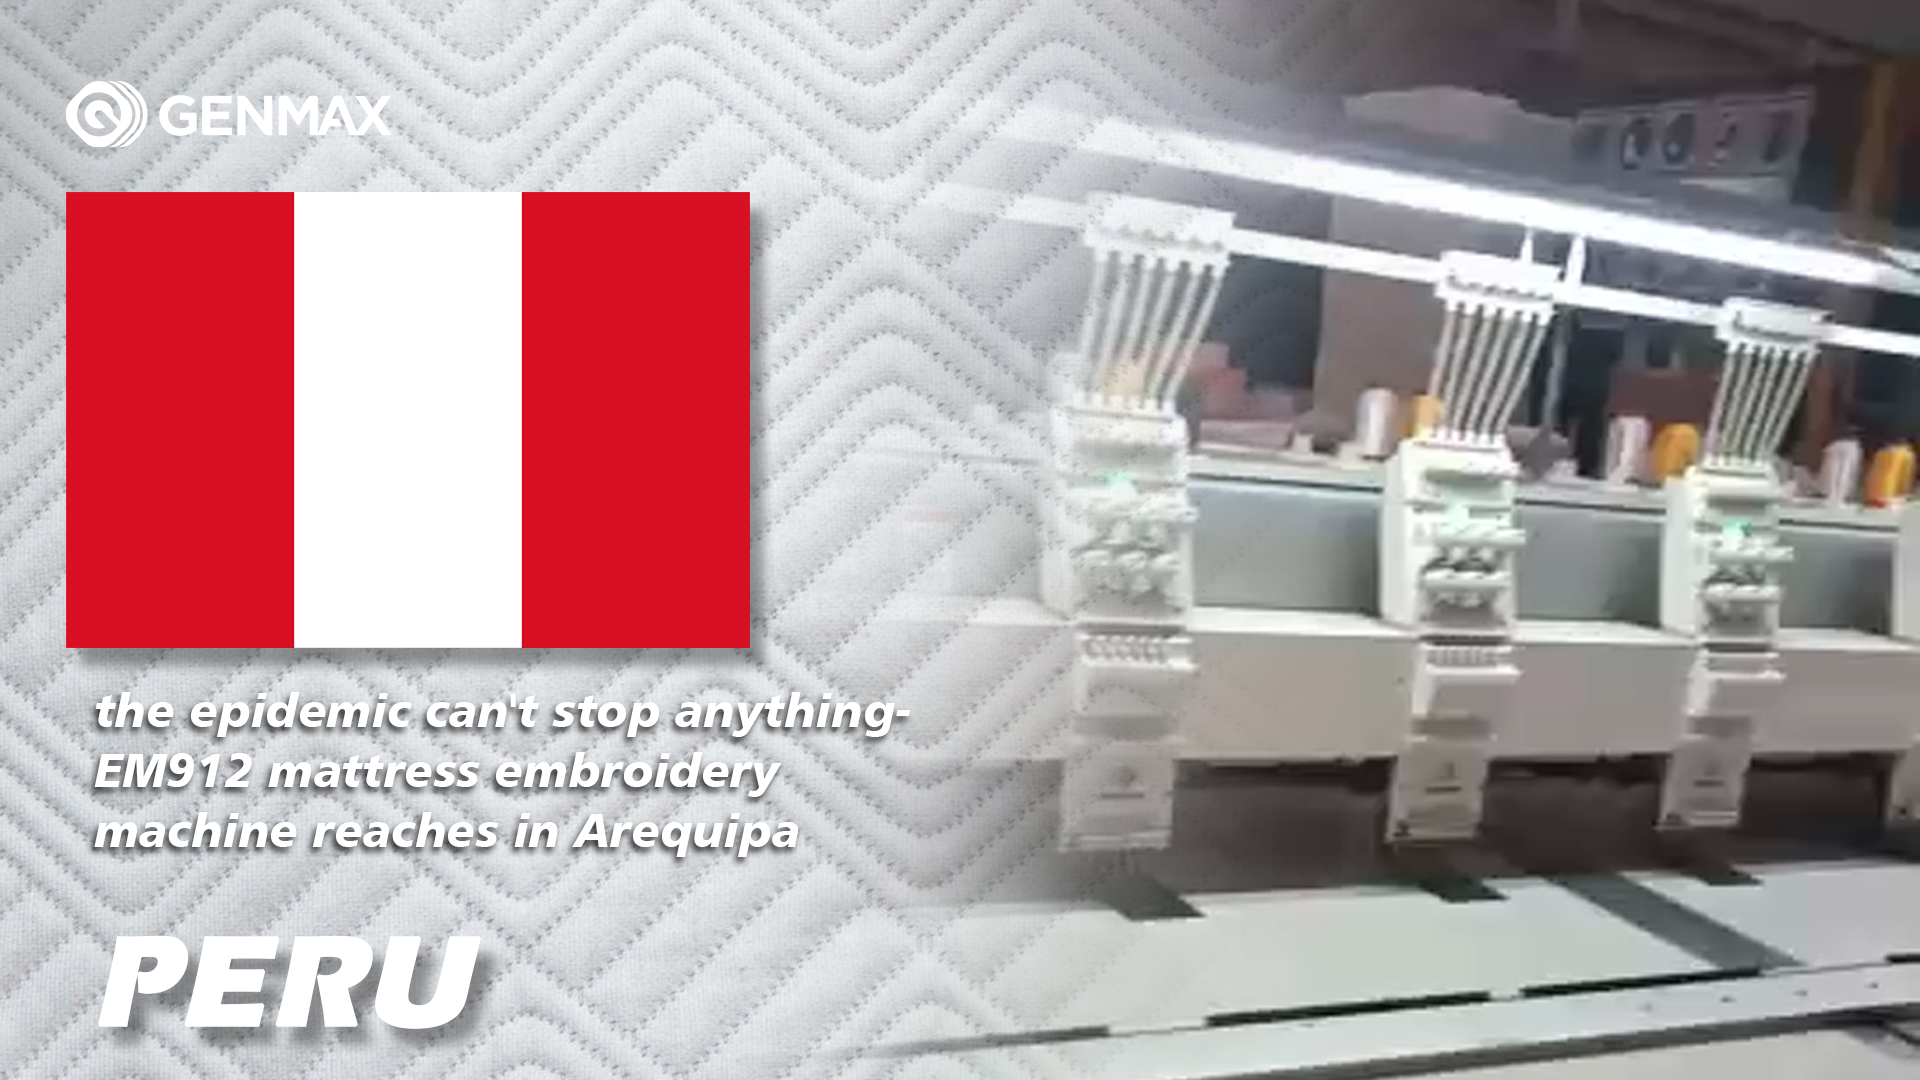 the epidemic can't stop anything-EM912 mattress embroidery machine reaches in Arequipa